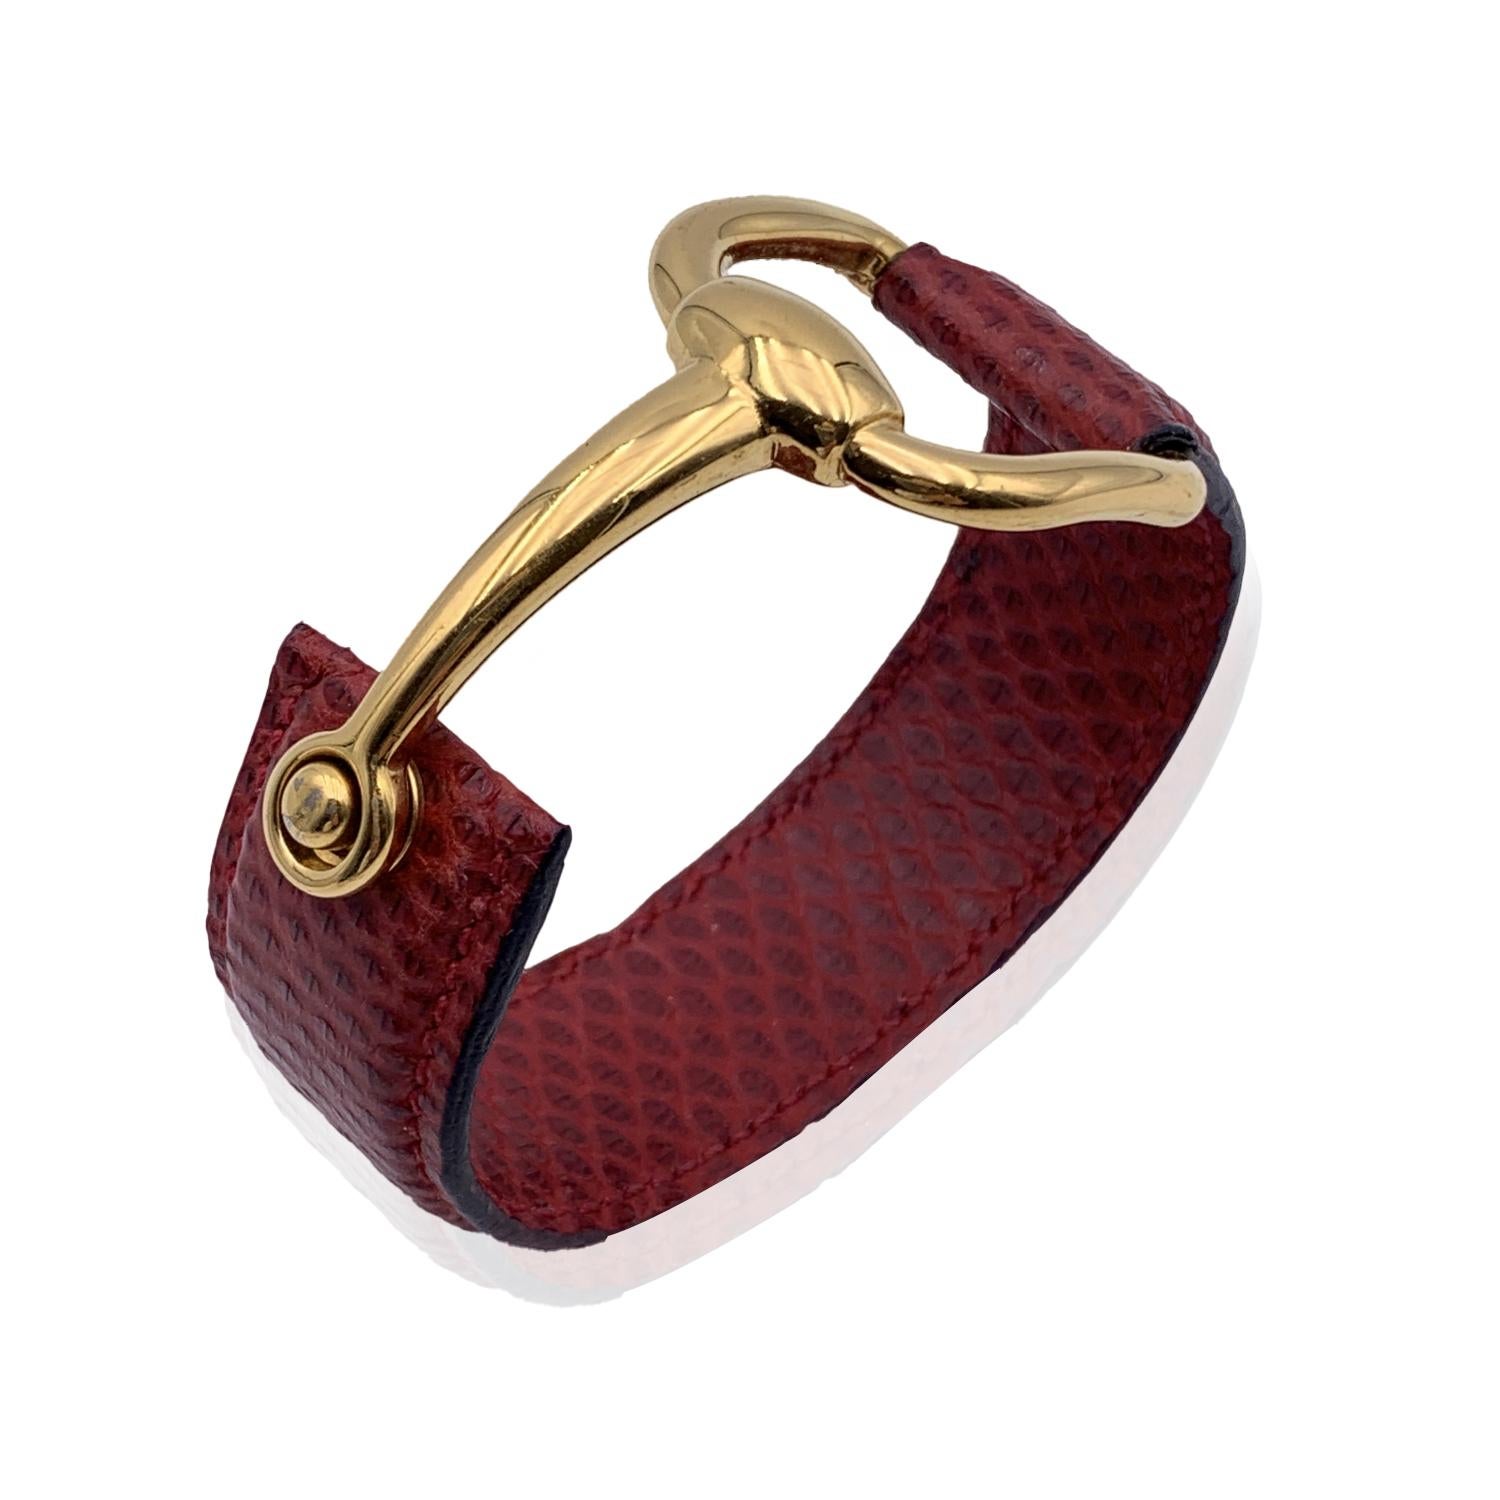 Vintage beautiful cuff bracelet by Gucci. Made in red leather, it features an gold metal half-horsebit. Will fit up to approx. 6.5 inches - 16.5 cm wrist. Width: 0.75 inches - 2 cm. 'Gucci - made in Italy' engraved on the reverse of the